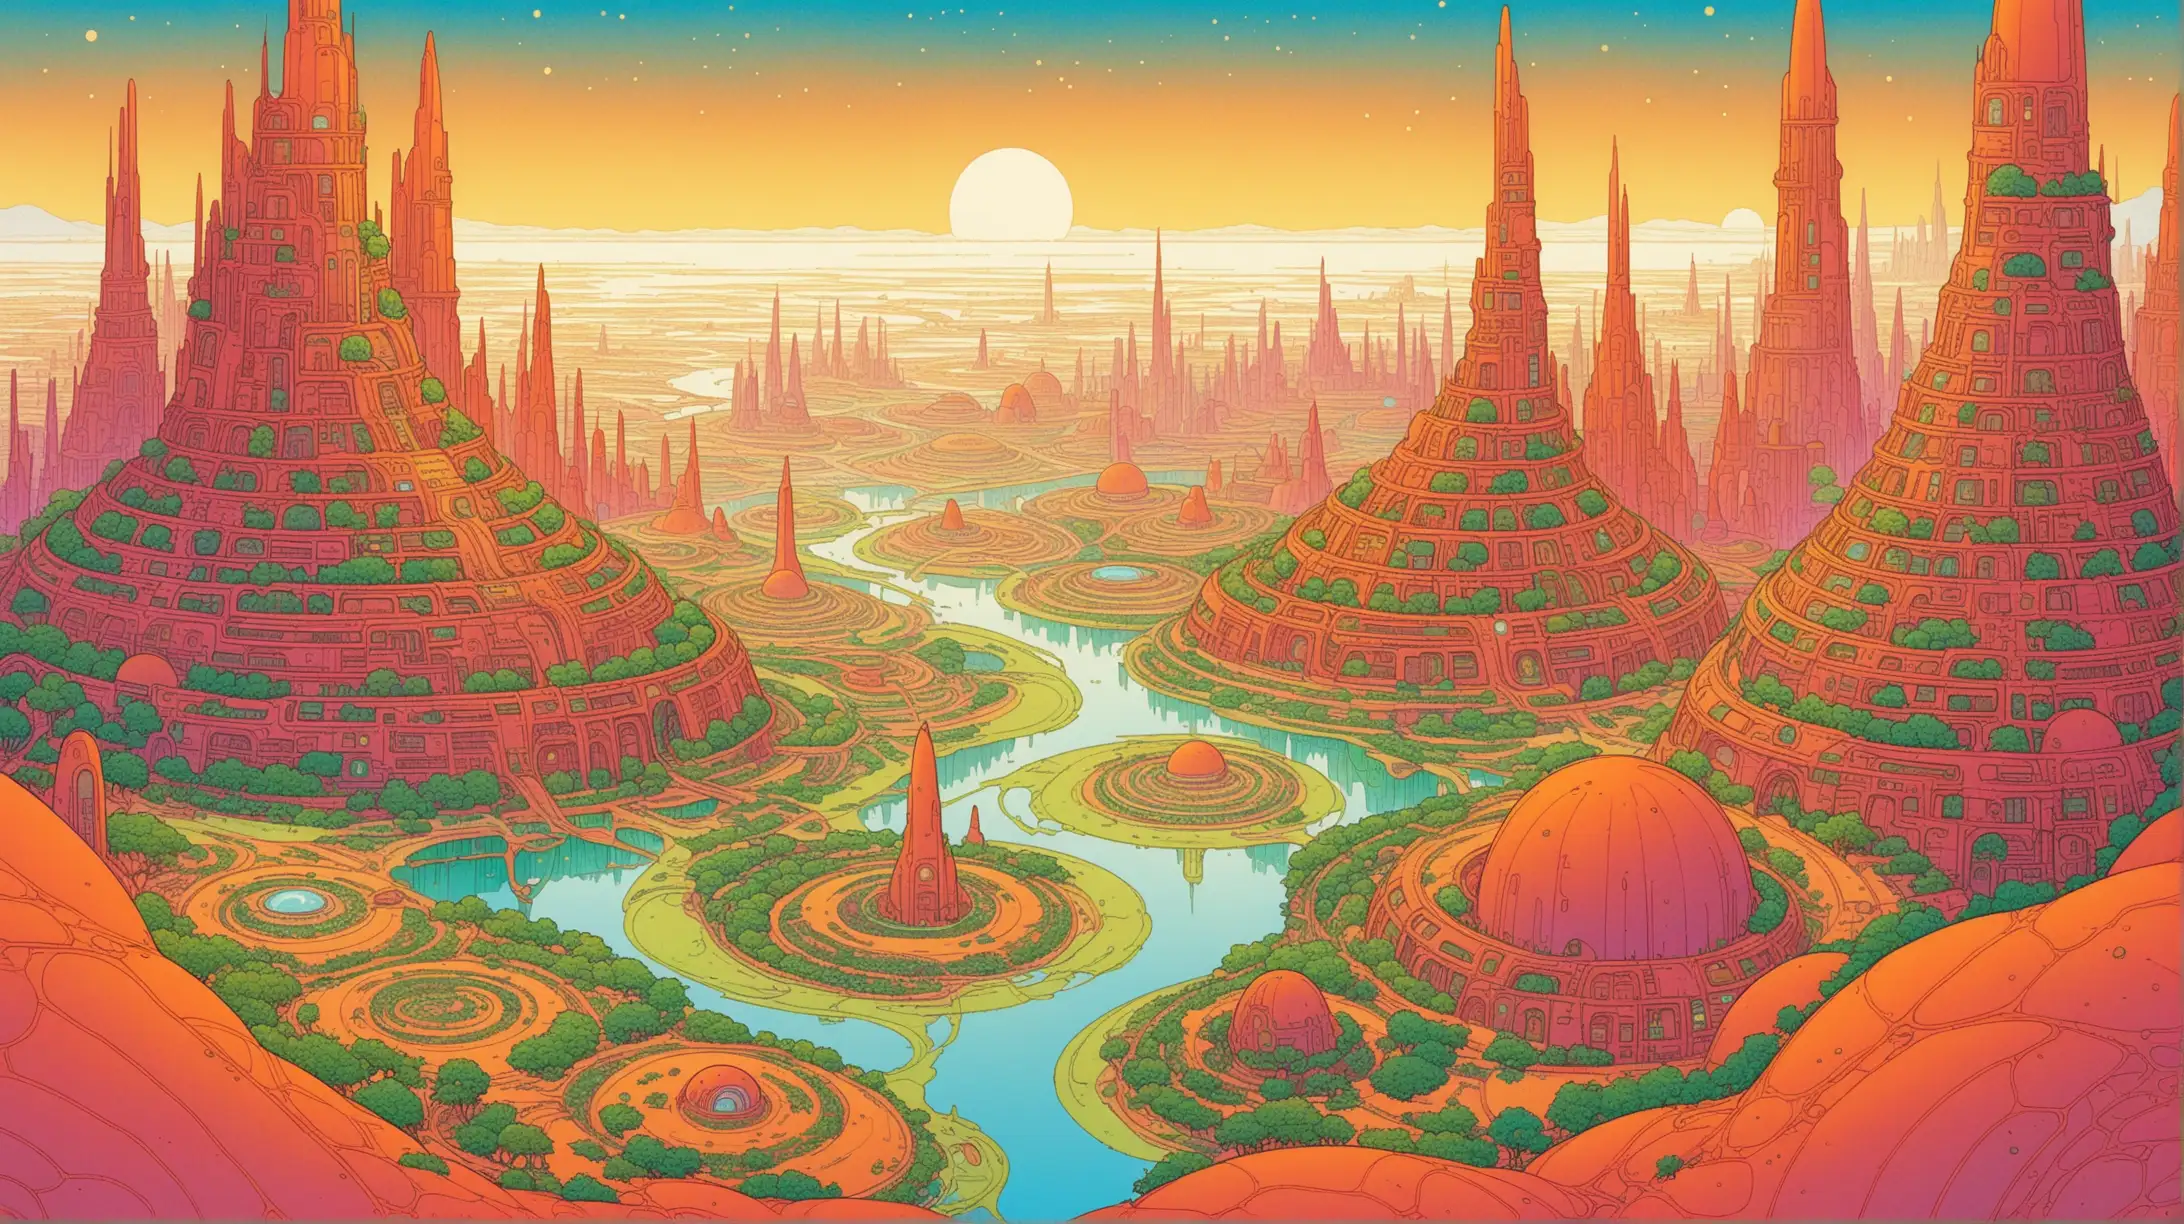 magical garden alien city, three complex, warm colors, gloomy, embroidered, detailed, art by moebius,